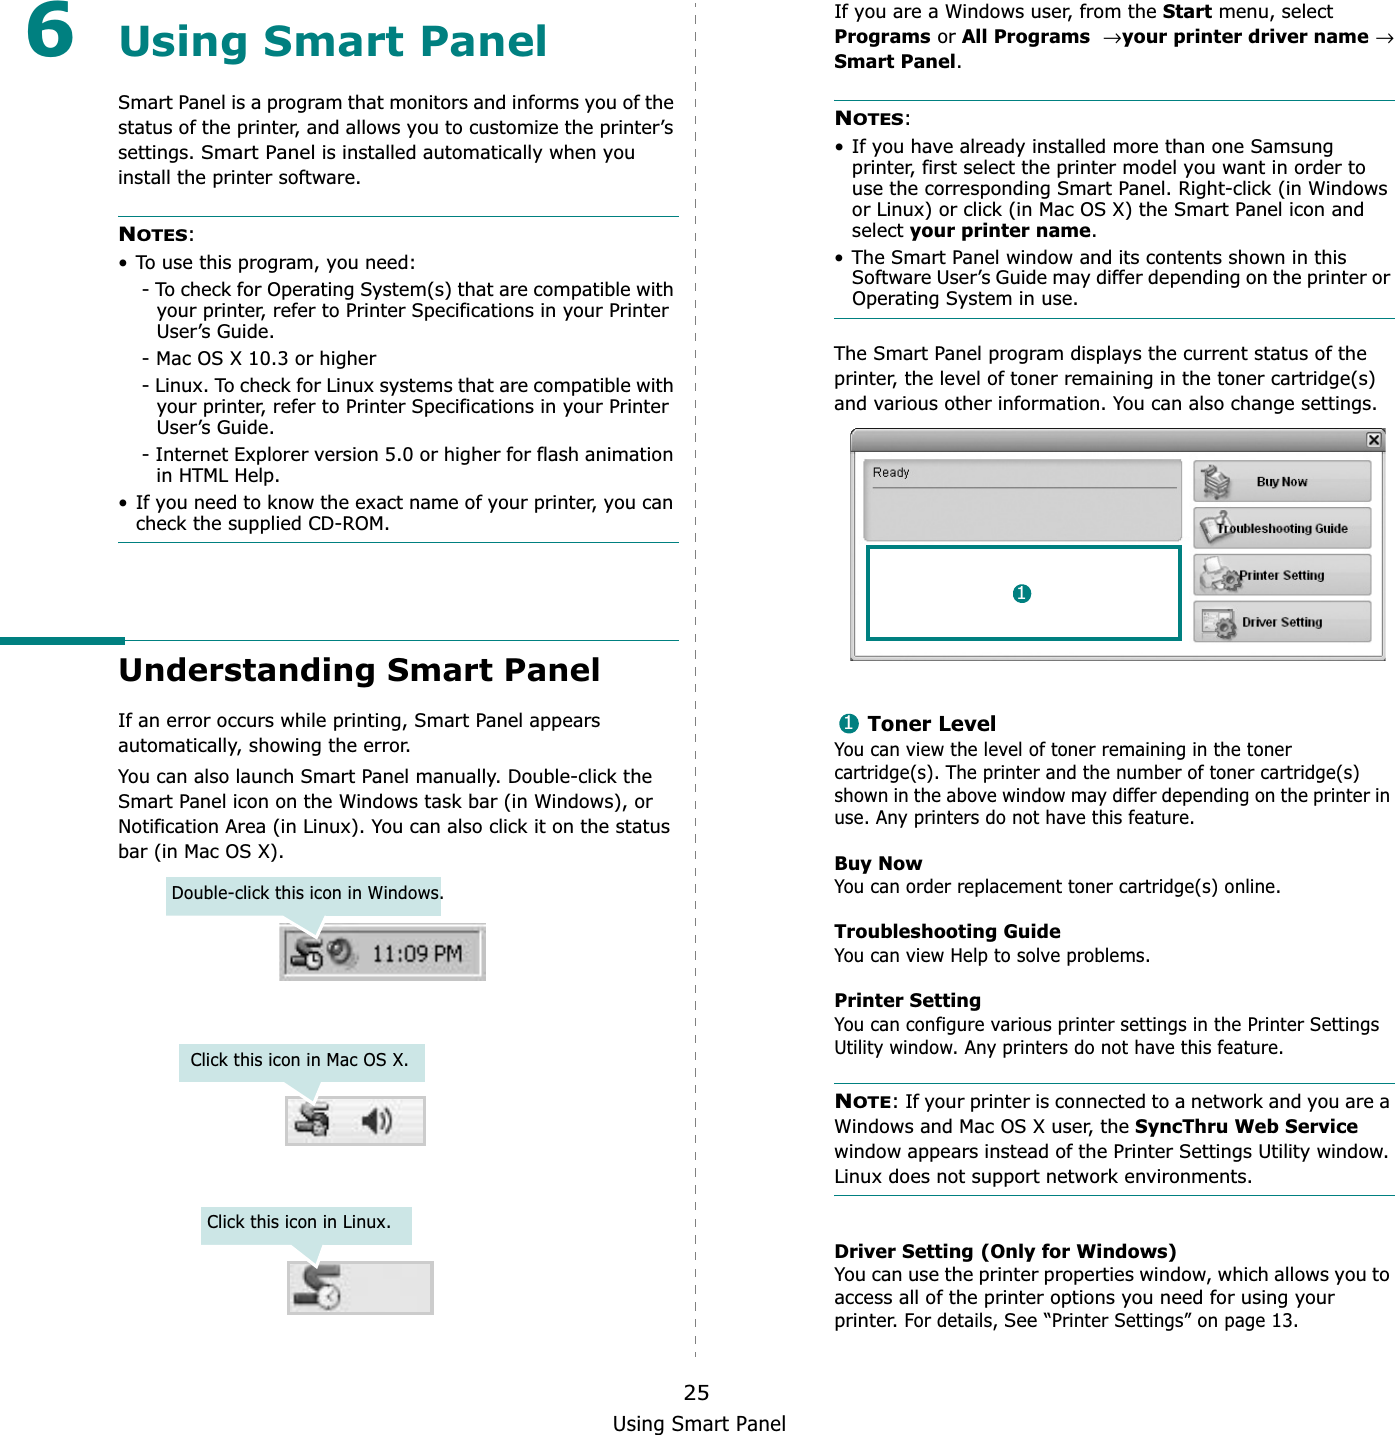 Using Smart Panel256Using Smart PanelSmart Panel is a program that monitors and informs you of the status of the printer, and allows you to customize the printer’s settings.Smart Panel is installed automatically when you install the printer software.NOTES:• To use this program, you need:- To check for Operating System(s) that are compatible with your printer, refer to Printer Specifications in your Printer User’s Guide.- Mac OS X 10.3 or higher- Linux. To check for Linux systems that are compatible with your printer, refer to Printer Specifications in your Printer User’s Guide.- Internet Explorer version 5.0 or higher for flash animation in HTML Help.• If you need to know the exact name of your printer, you can check the supplied CD-ROM.Understanding Smart PanelIf an error occurs while printing, Smart Panel appears automatically, showing the error.You can also launch Smart Panel manually. Double-click the Smart Panel icon on the Windows task bar (in Windows), or Notification Area (in Linux). You can also click it on the status bar (in Mac OS X).Double-click this icon in Windows.Click this icon in Mac OS X.Click this icon in Linux.If you are a Windows user, from the Start menu, select Programs or All Programs→ your printer driver name→ Smart Panel.NOTES:• If you have already installed more than one Samsung printer, first select the printer model you want in order to use the corresponding Smart Panel. Right-click (in Windows or Linux) or click (in Mac OS X) the Smart Panel icon and select your printer name.• The Smart Panel window and its contents shown in this Software User’s Guide may differ depending on the printer or Operating System in use.The Smart Panel program displays the current status of the printer, the level of toner remaining in the toner cartridge(s) and various other information. You can also change settings.Toner LevelYou can view the level of toner remaining in the toner cartridge(s). The printer and the number of toner cartridge(s) shown in the above window may differ depending on the printer in use. Any printers do not have this feature.Buy NowYou can order replacement toner cartridge(s) online.Troubleshooting GuideYou can view Help to solve problems.Printer SettingYou can configure various printer settings in the Printer Settings Utility window. Any printers do not have this feature.NOTE: If your printer is connected to a network and you are a Windows and Mac OS X user, the SyncThru Web Servicewindow appears instead of the Printer Settings Utility window. Linux does not support network environments.Driver Setting (Only for Windows)You can use the printer properties window, which allows you to access all of the printer options you need for using your printer. For details, See “Printer Settings” on page 13.11